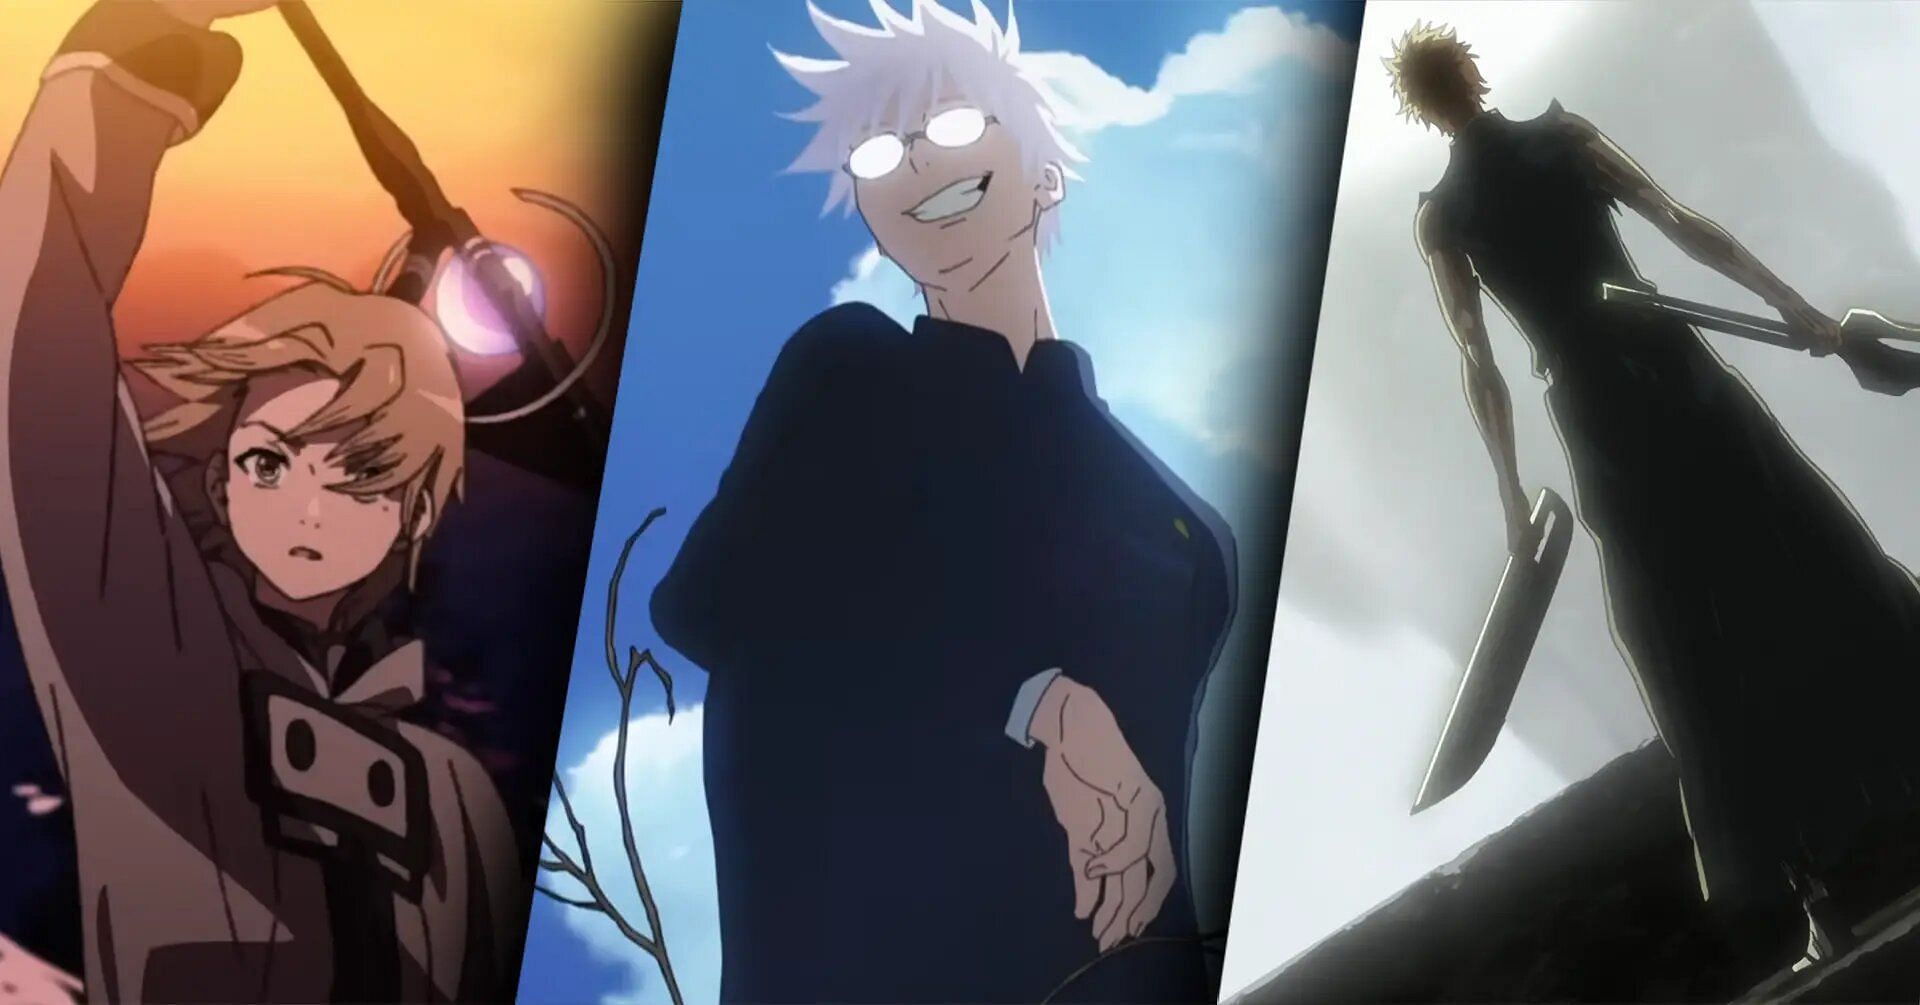 7 Anime Series You'll Be Hooked On | The Nerd Daily